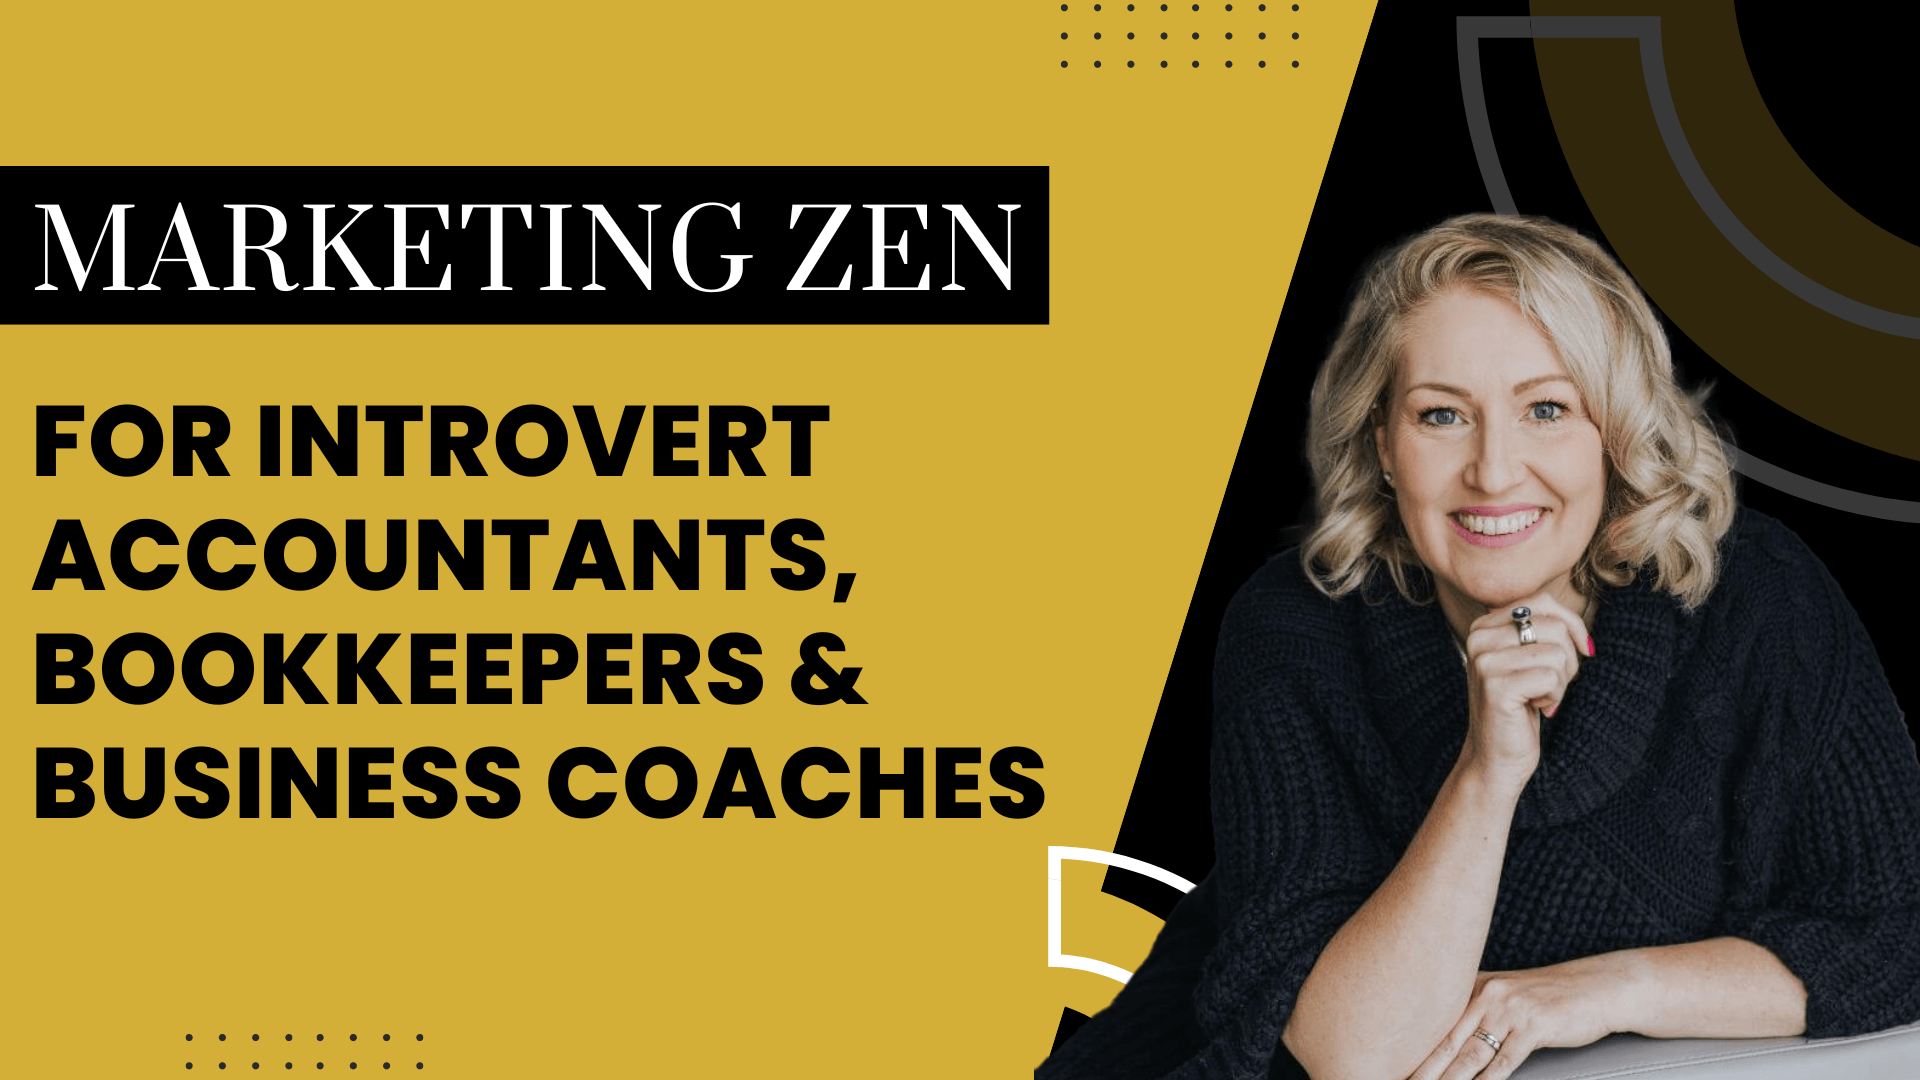 Marketing Zen for introvert accountants, bookkeeper and business coaches with Amanda C. Watts